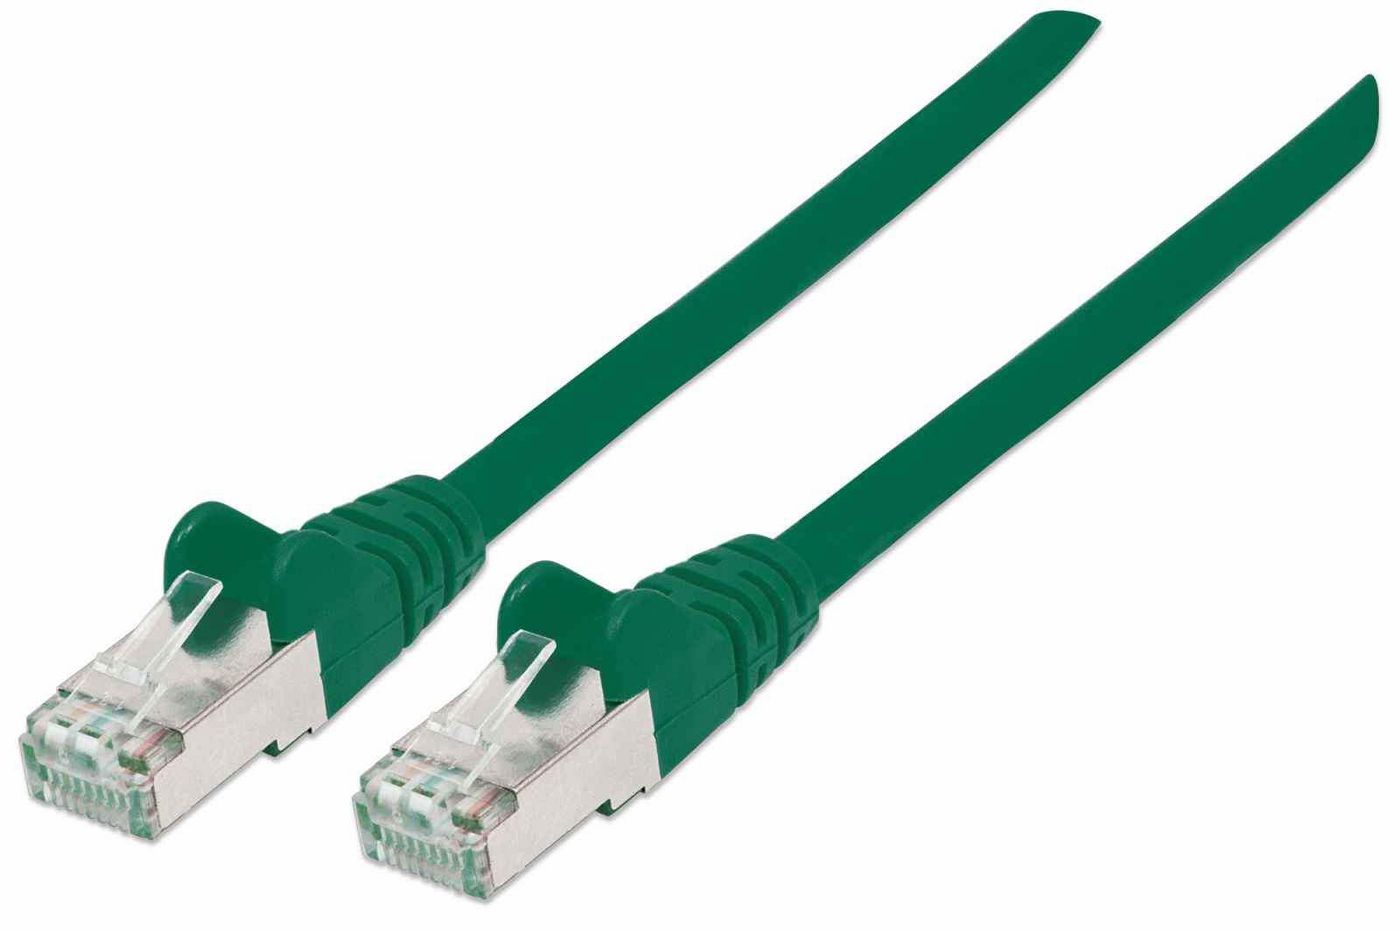 Intellinet 740715 High Performance Network Cable 